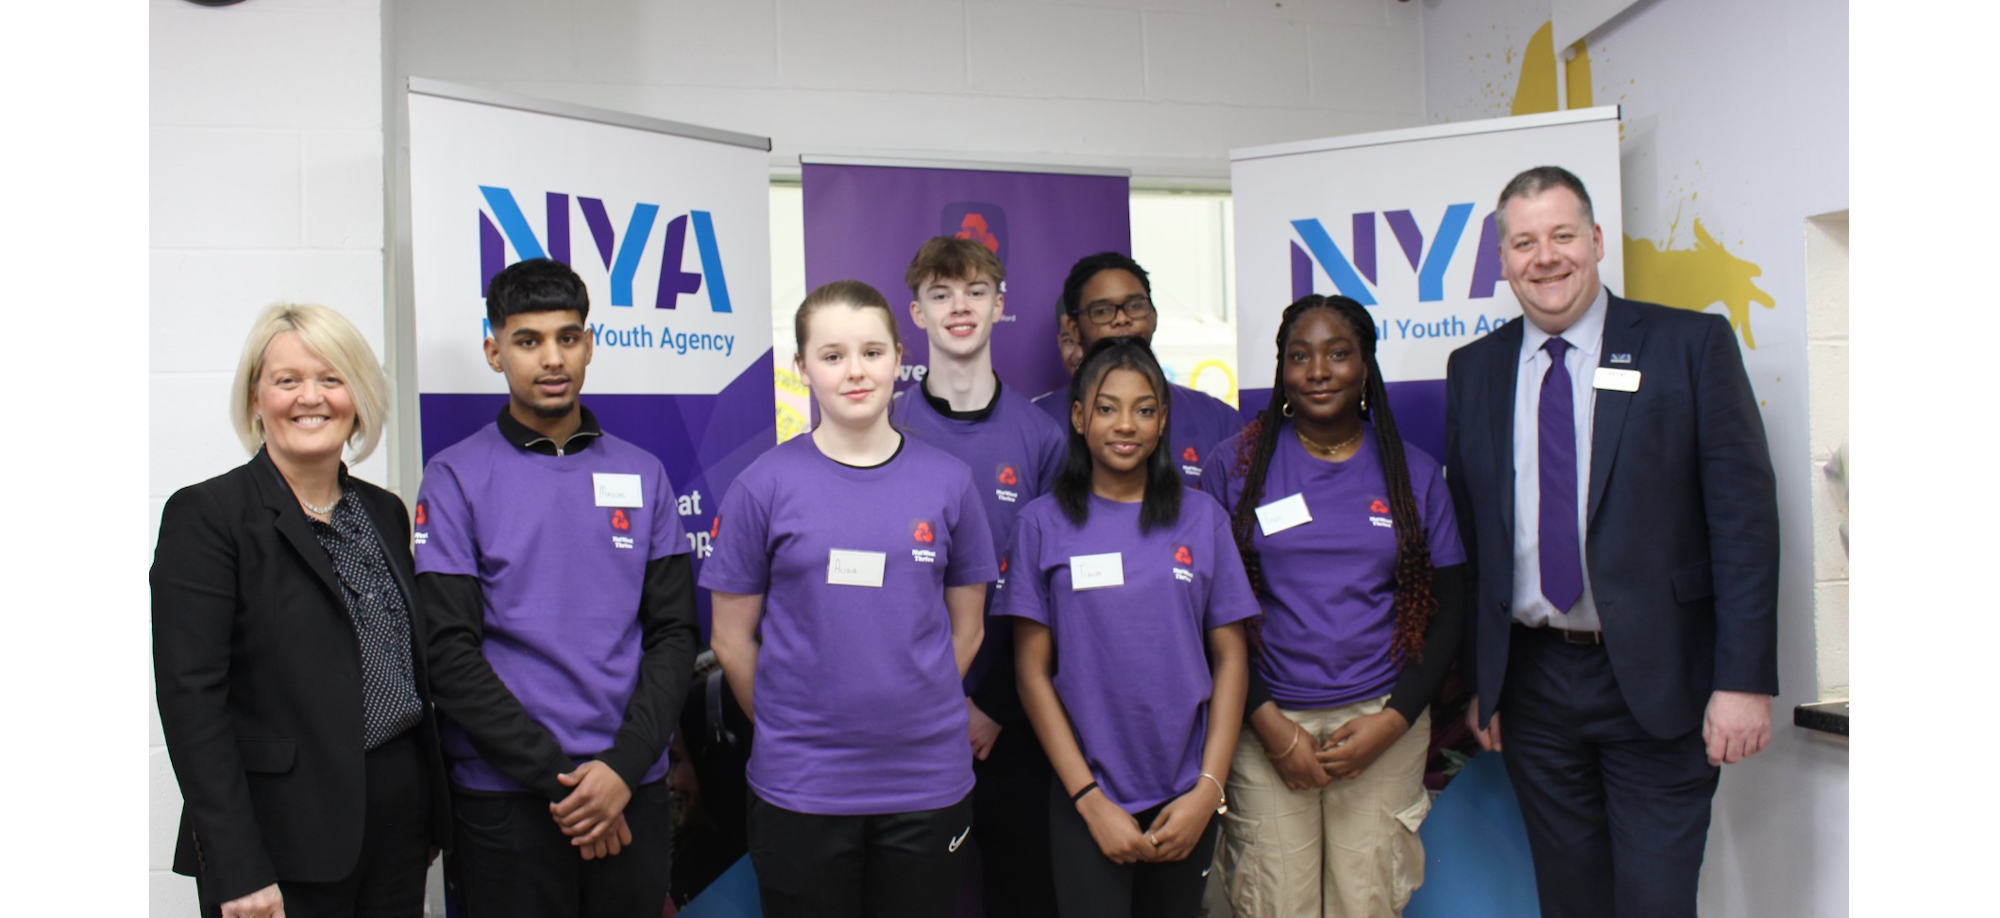 NatWest Group CEO Alison Rose with students at Norbrook youth club in Wythenshawe